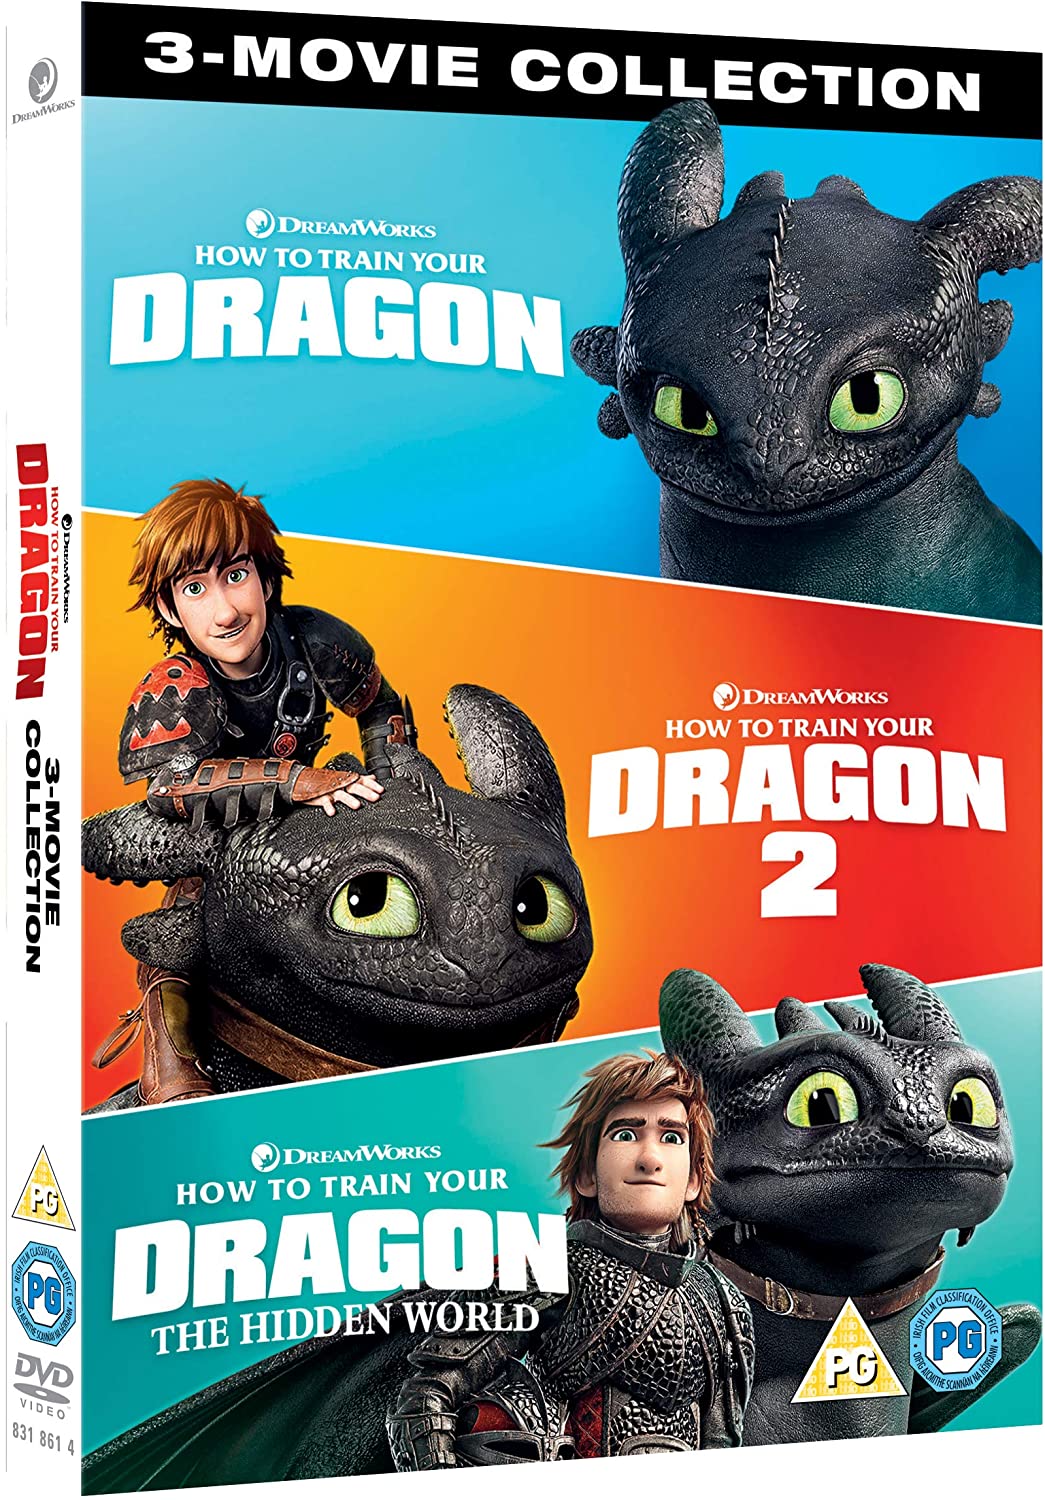 How To Train Your Dragon: 3 Film Collection (Dreamworks) (DVD)